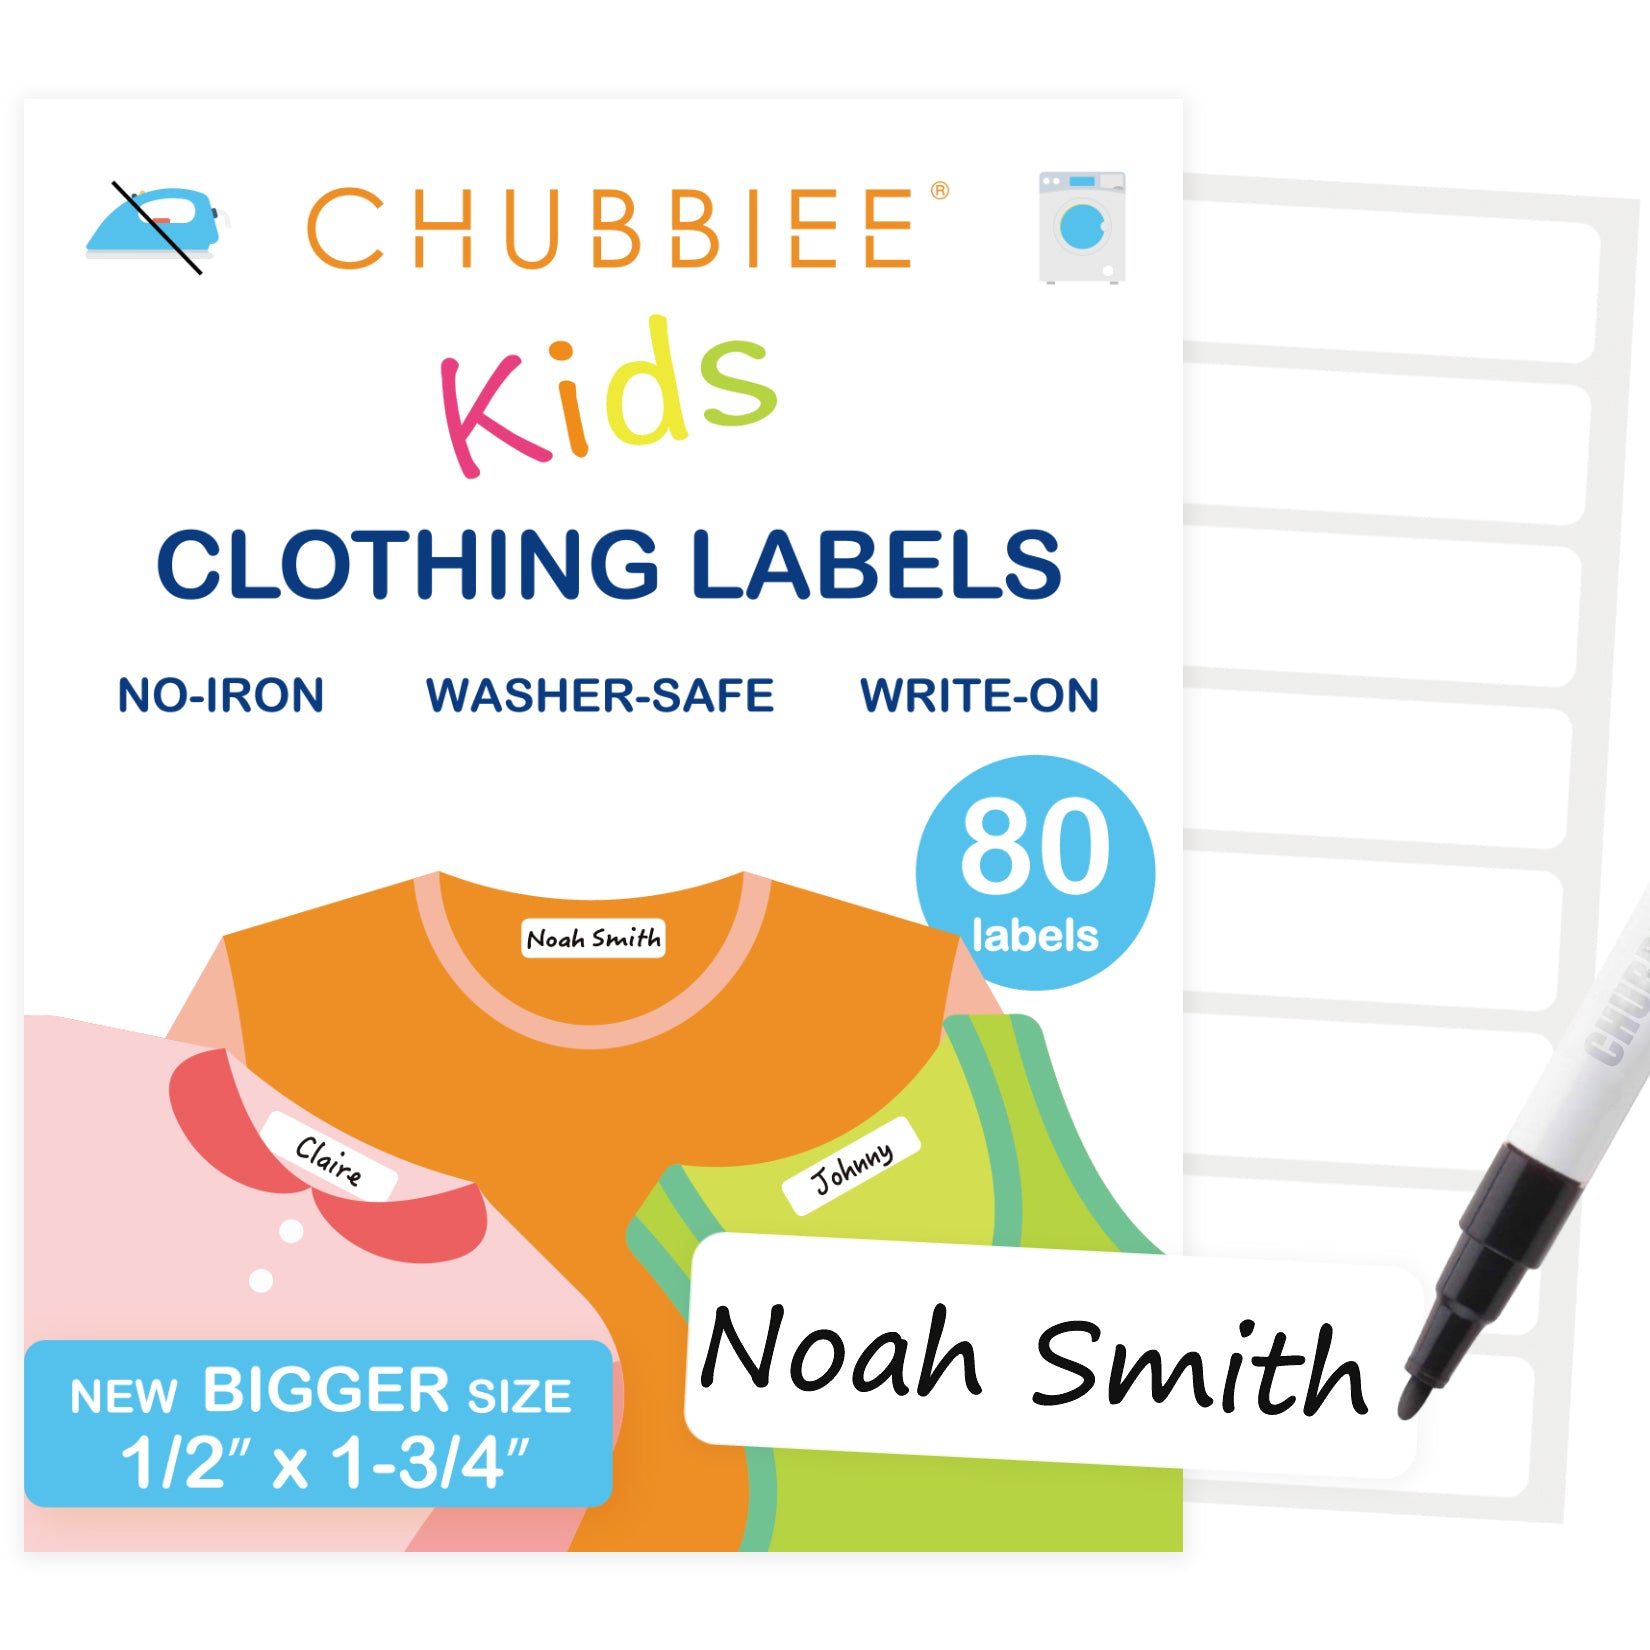 How to apply iron on name labels, School name labels, Stickerscape